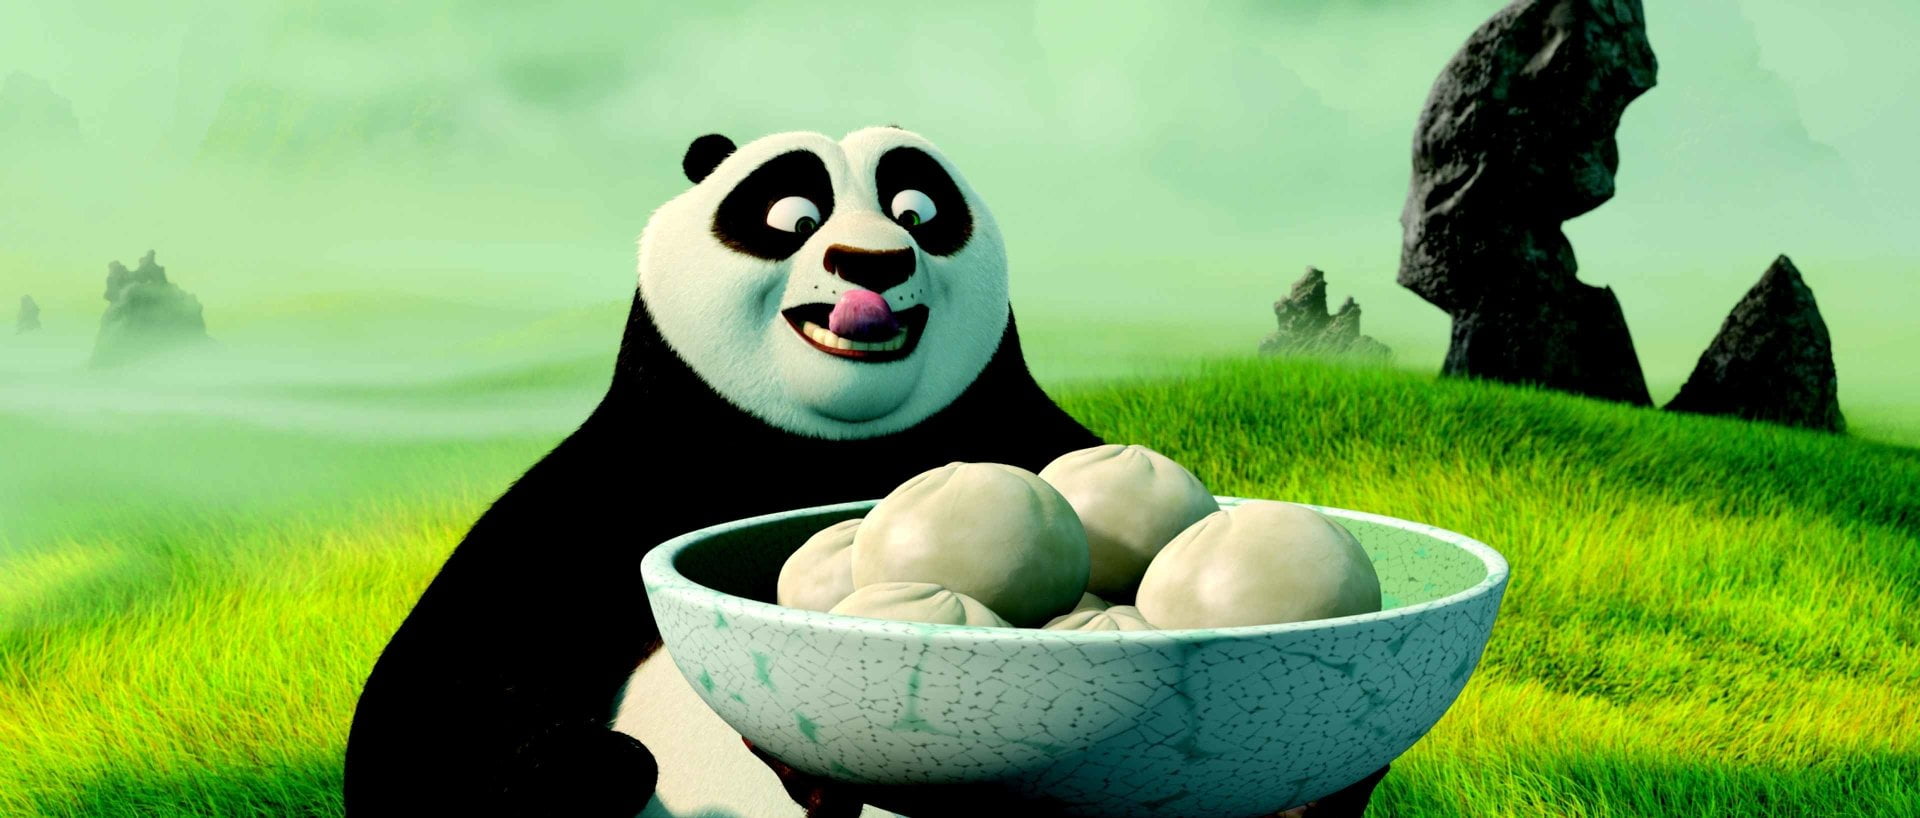 Kung Fu Panda, Kung Fu Panda 3, Po (Kung Fu Panda), grass, green color